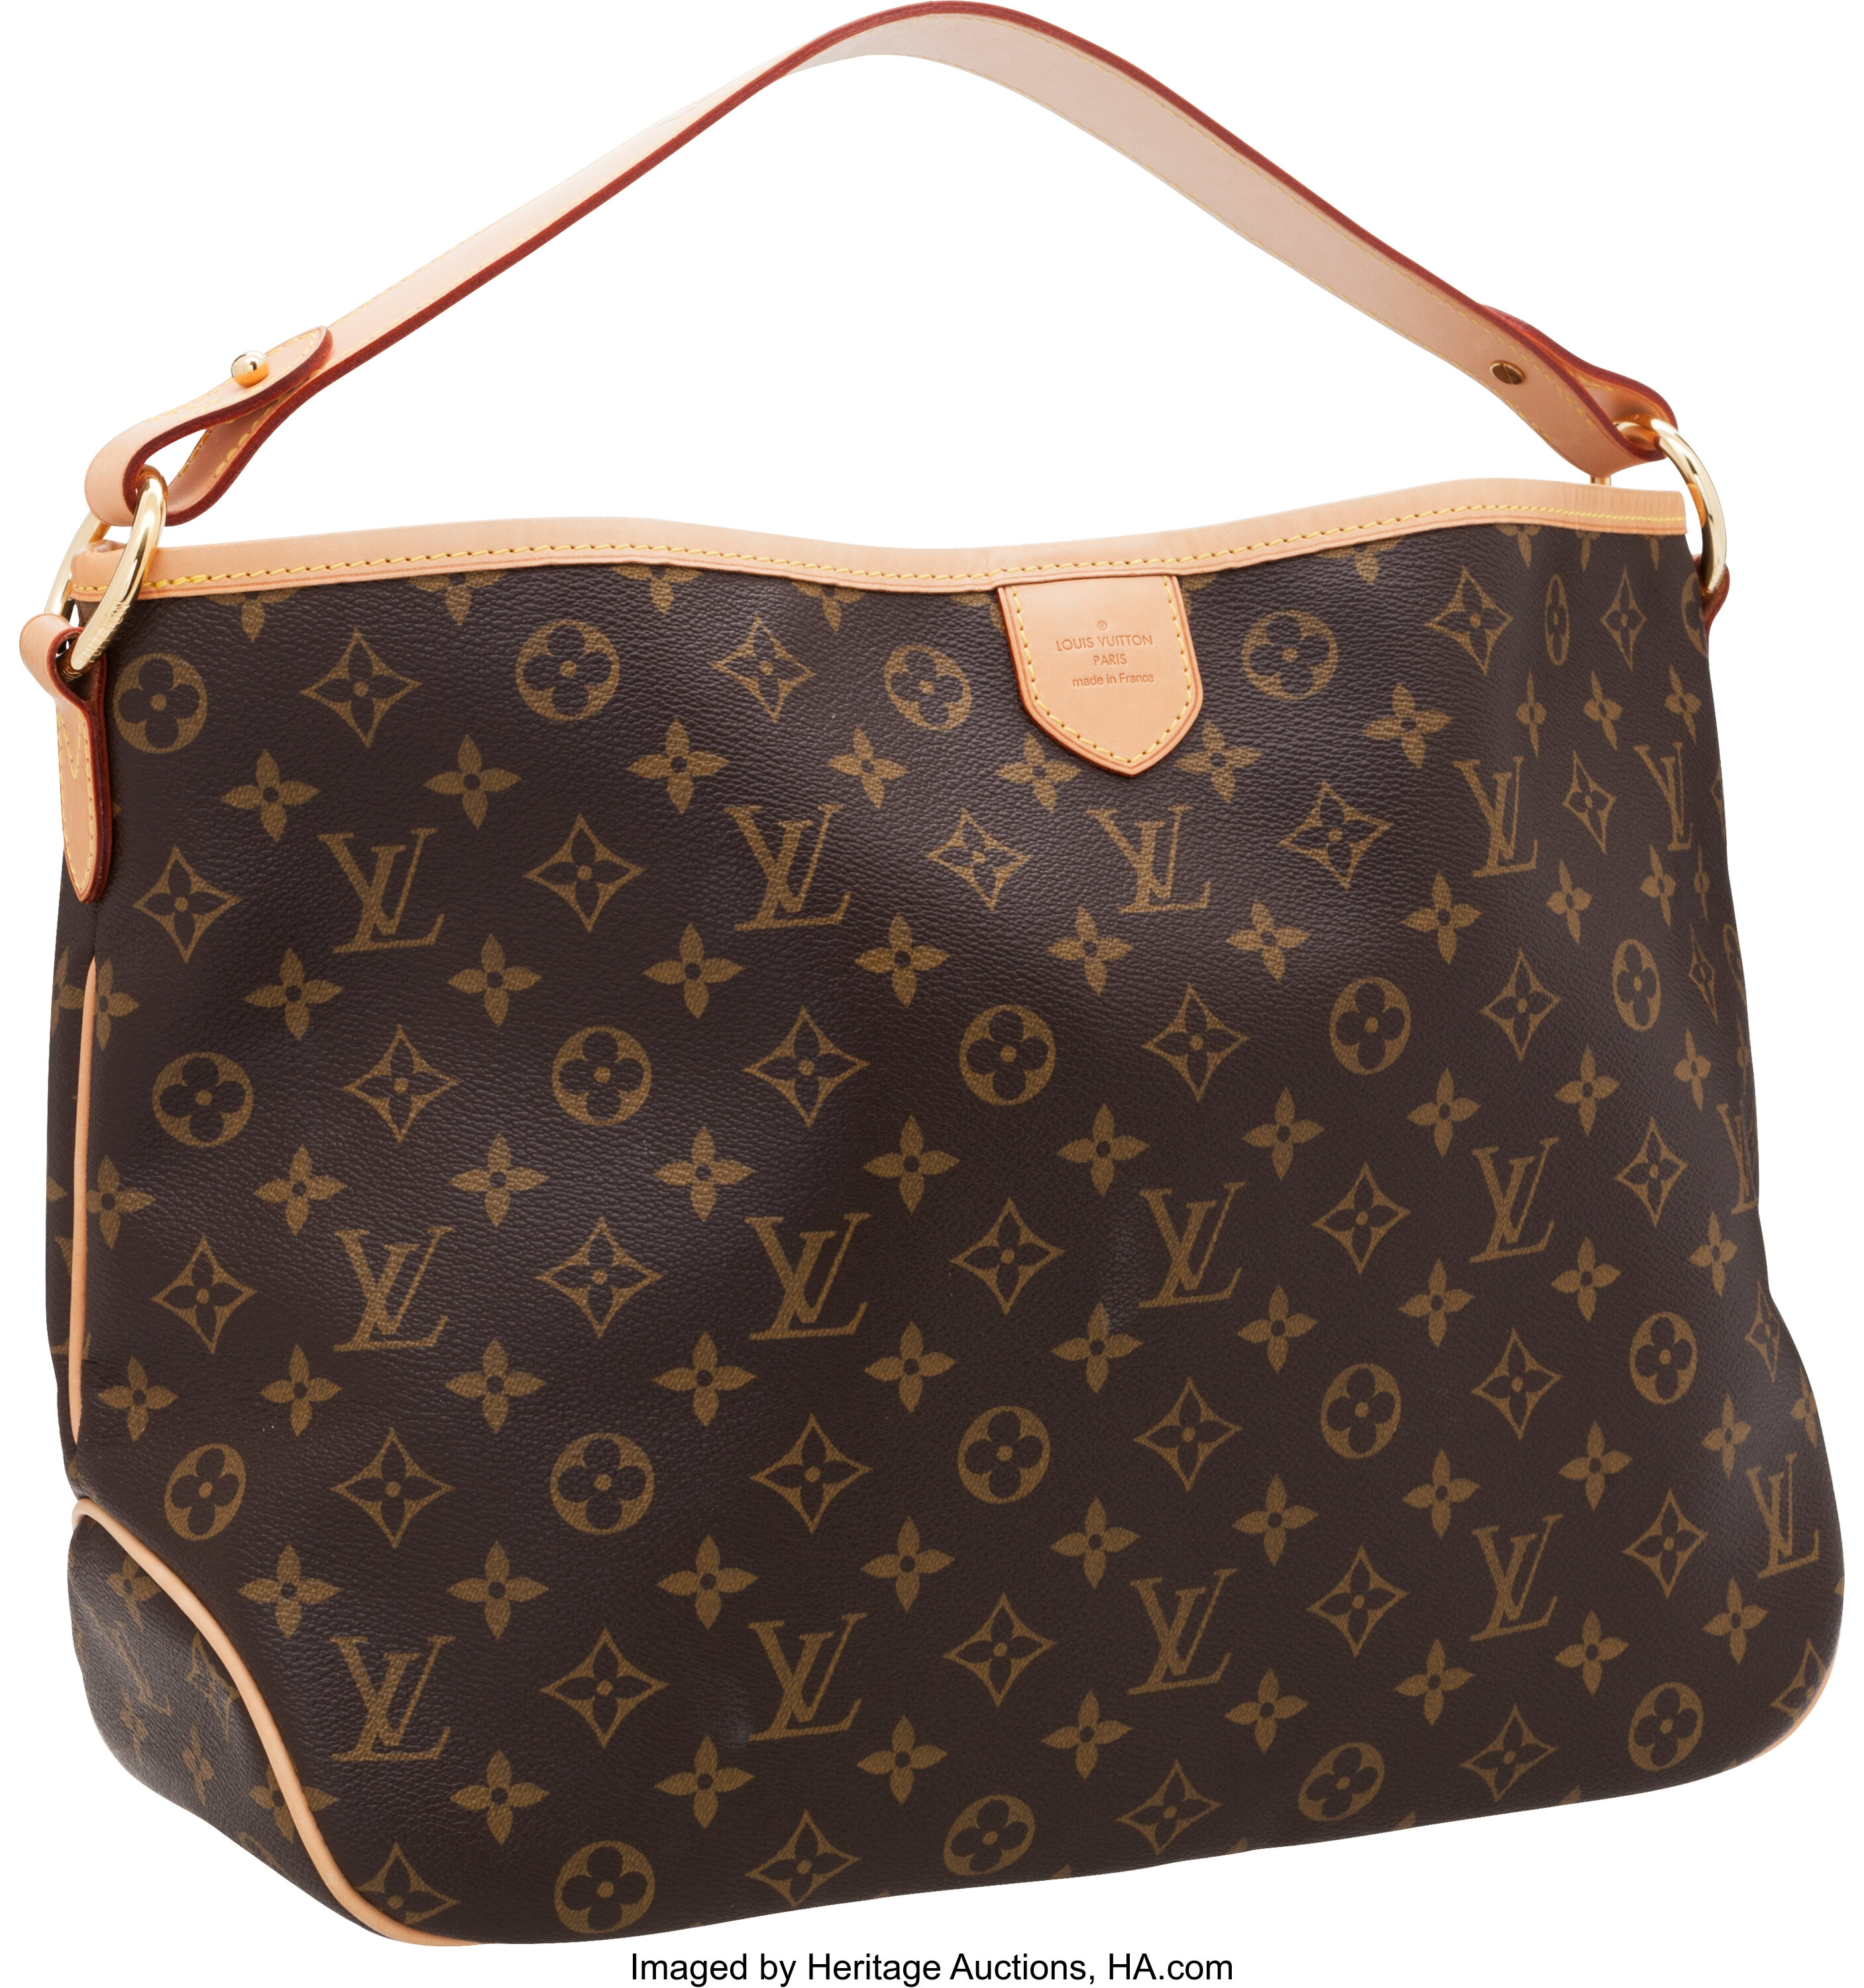 Revamped Louis Vuitton Delightful PM